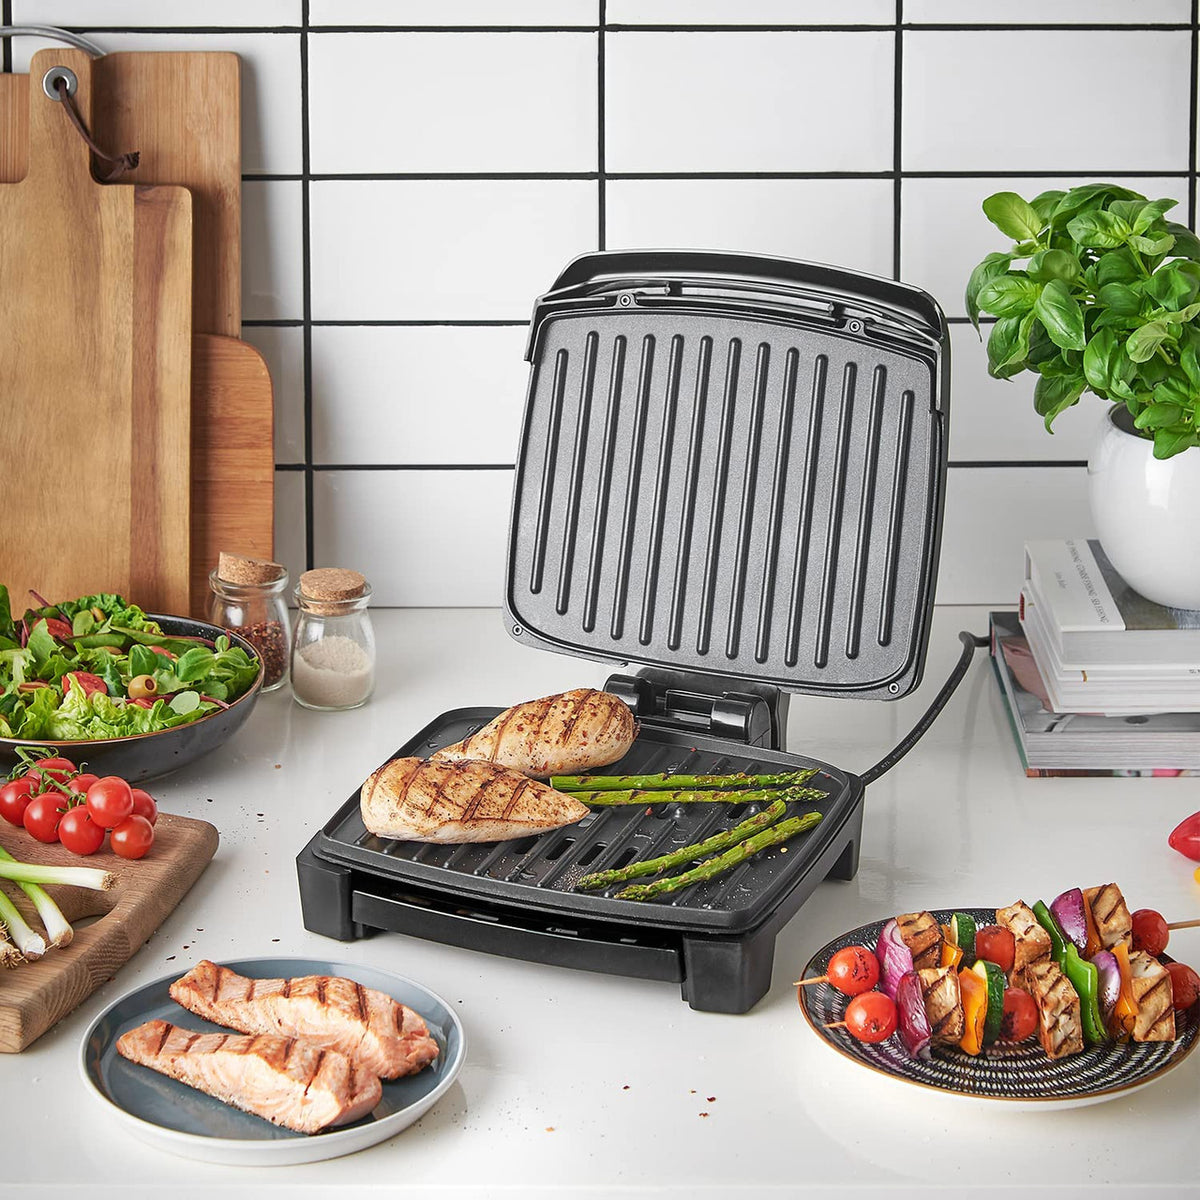 George Foreman Medium Immersa Grill - Black | 28310 from George Foreman - DID Electrical